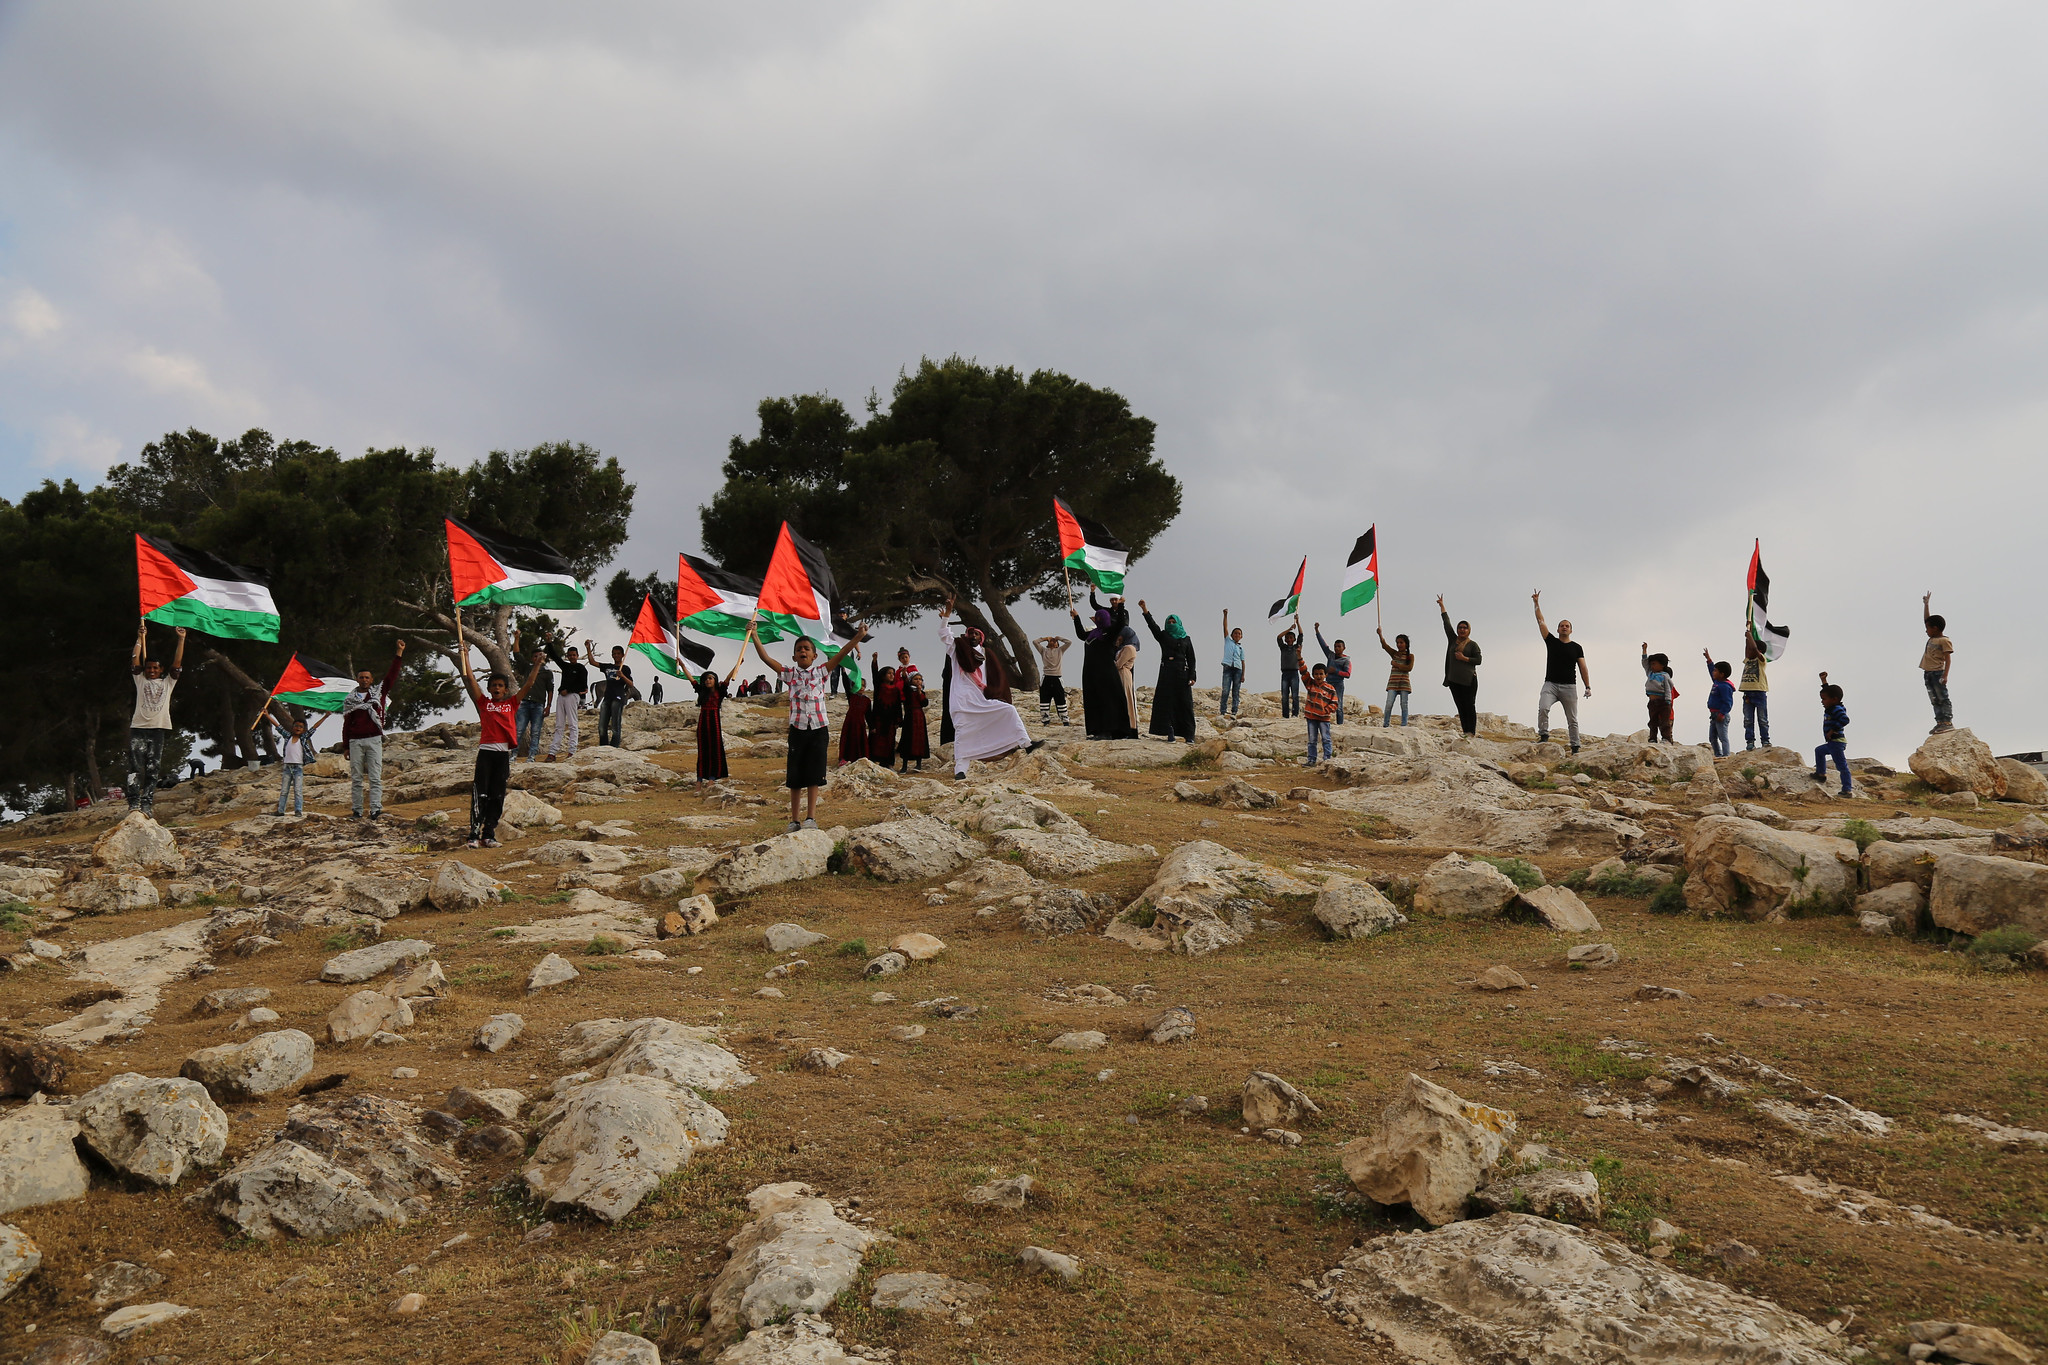 Palestinians standing on rocky hill with Palestinian flags